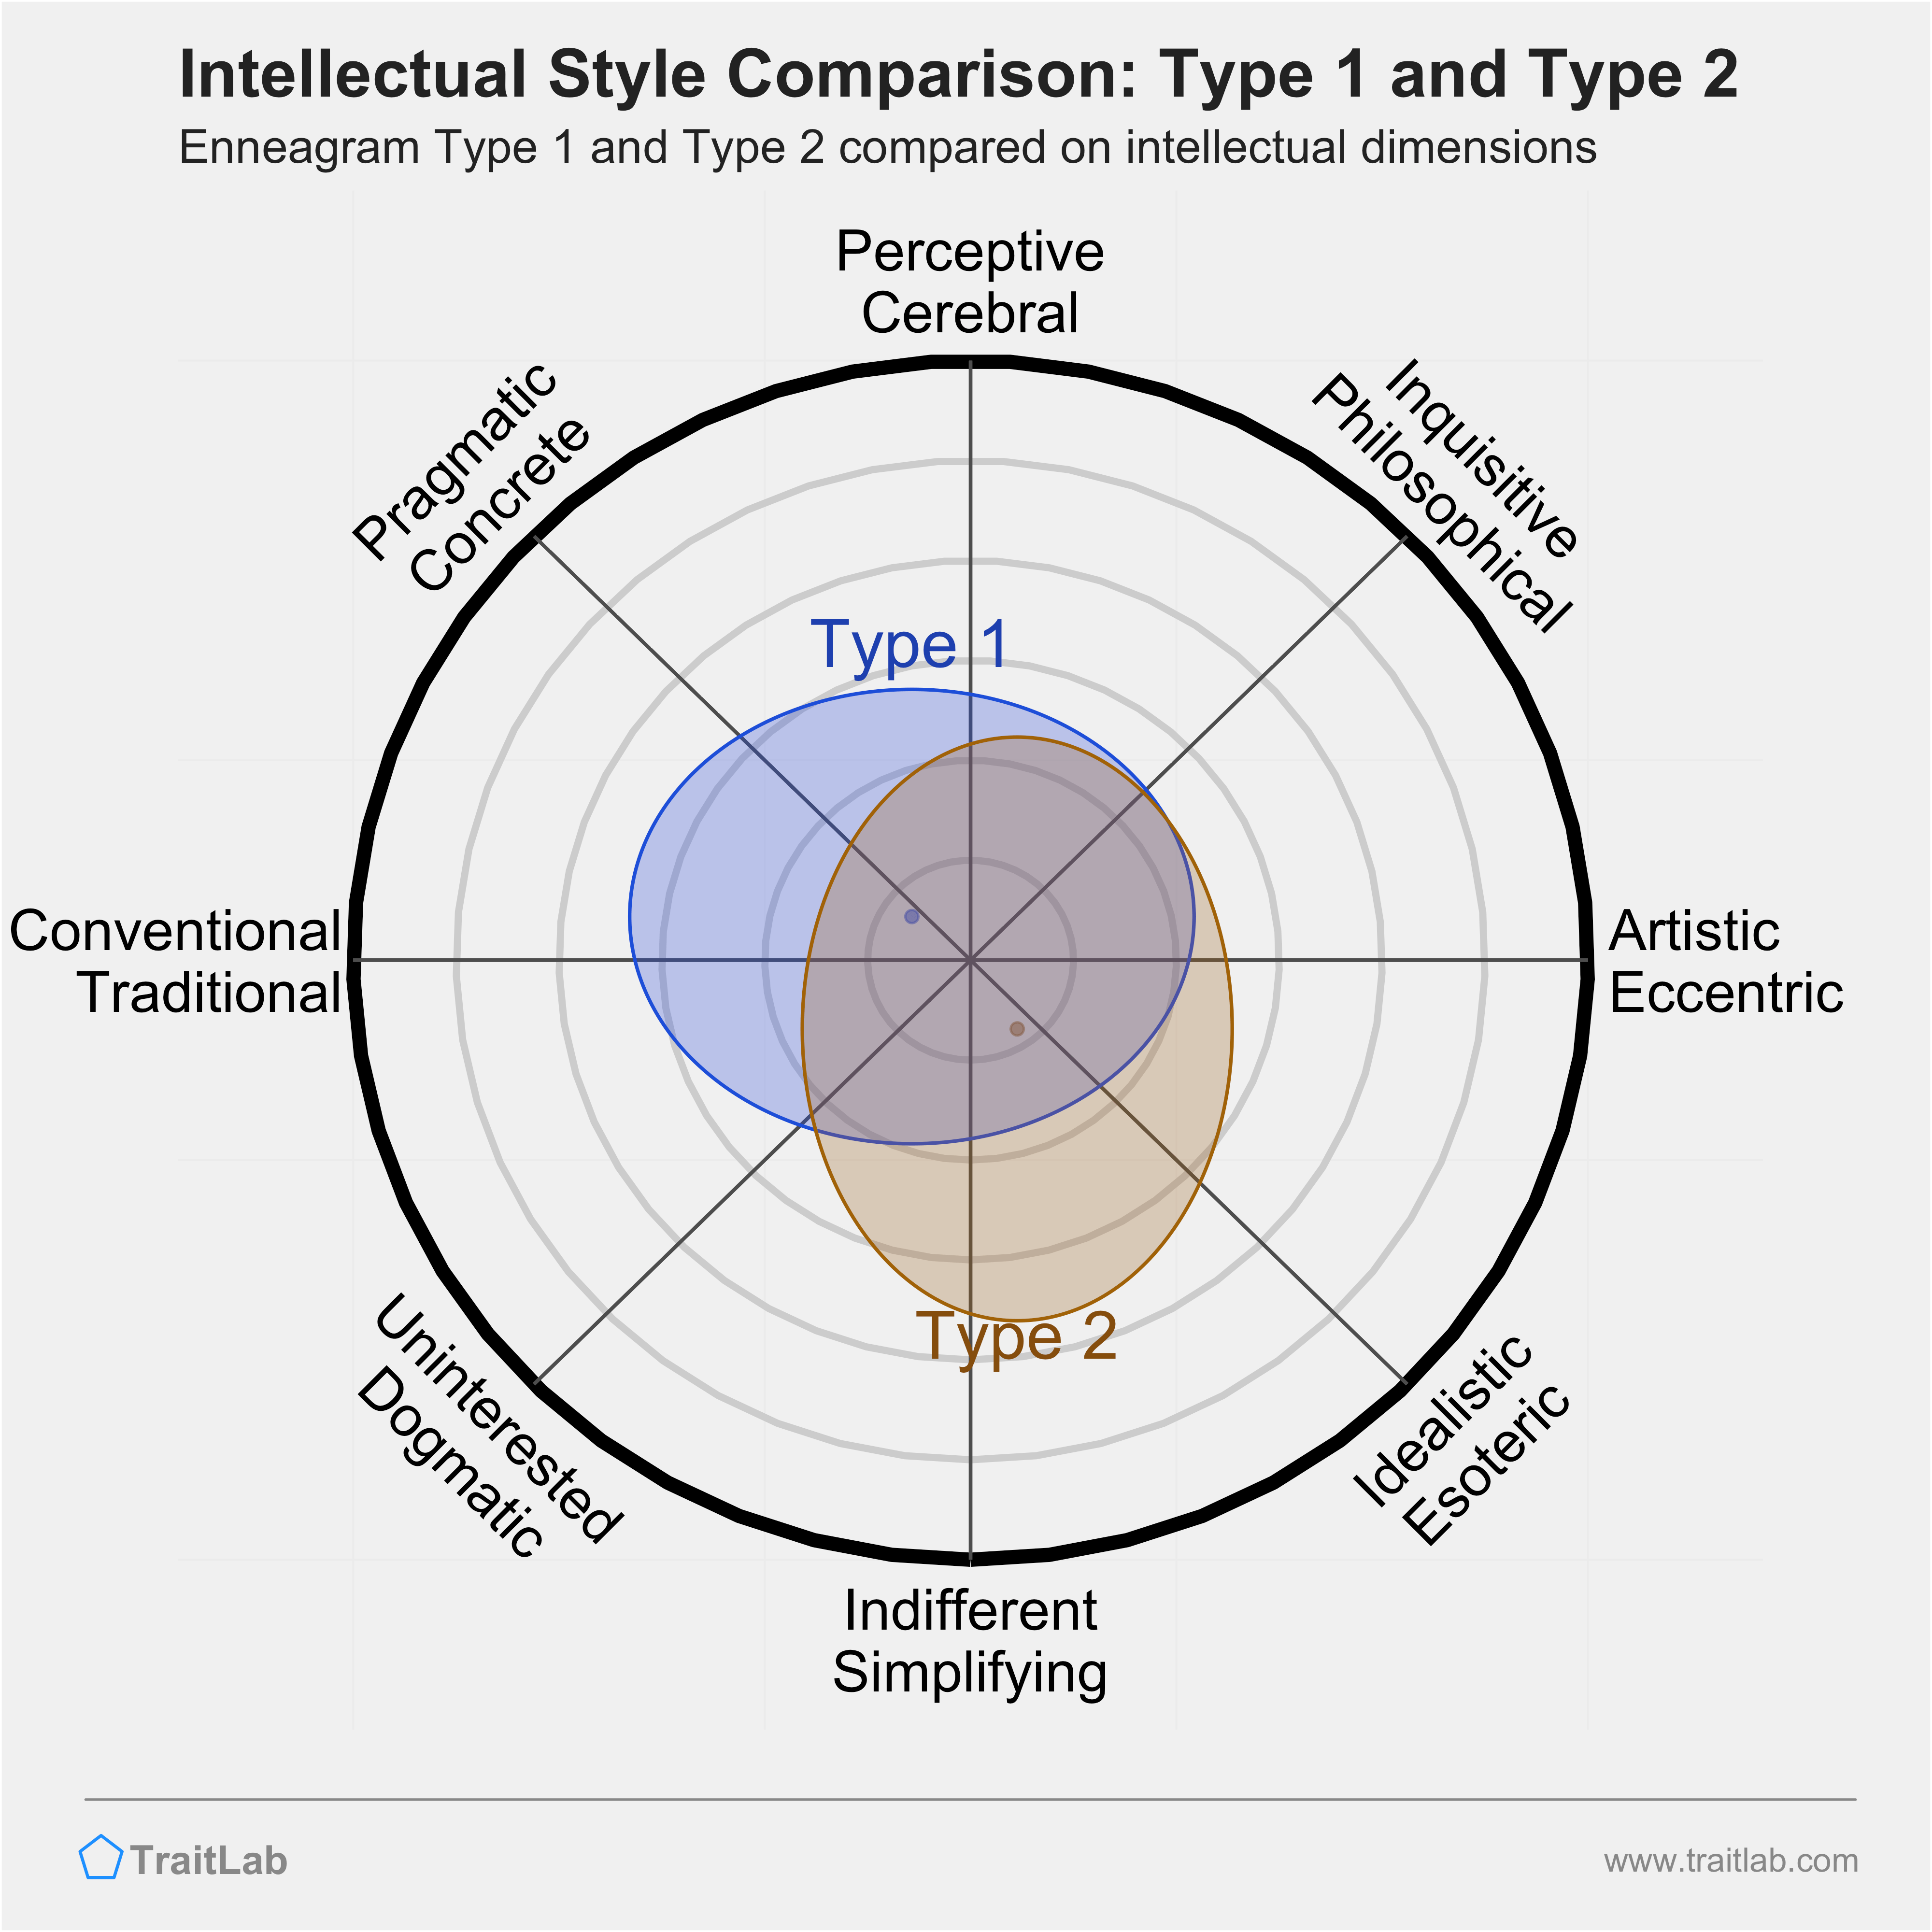 Type 1 and Type 2 comparison across intellectual dimensions